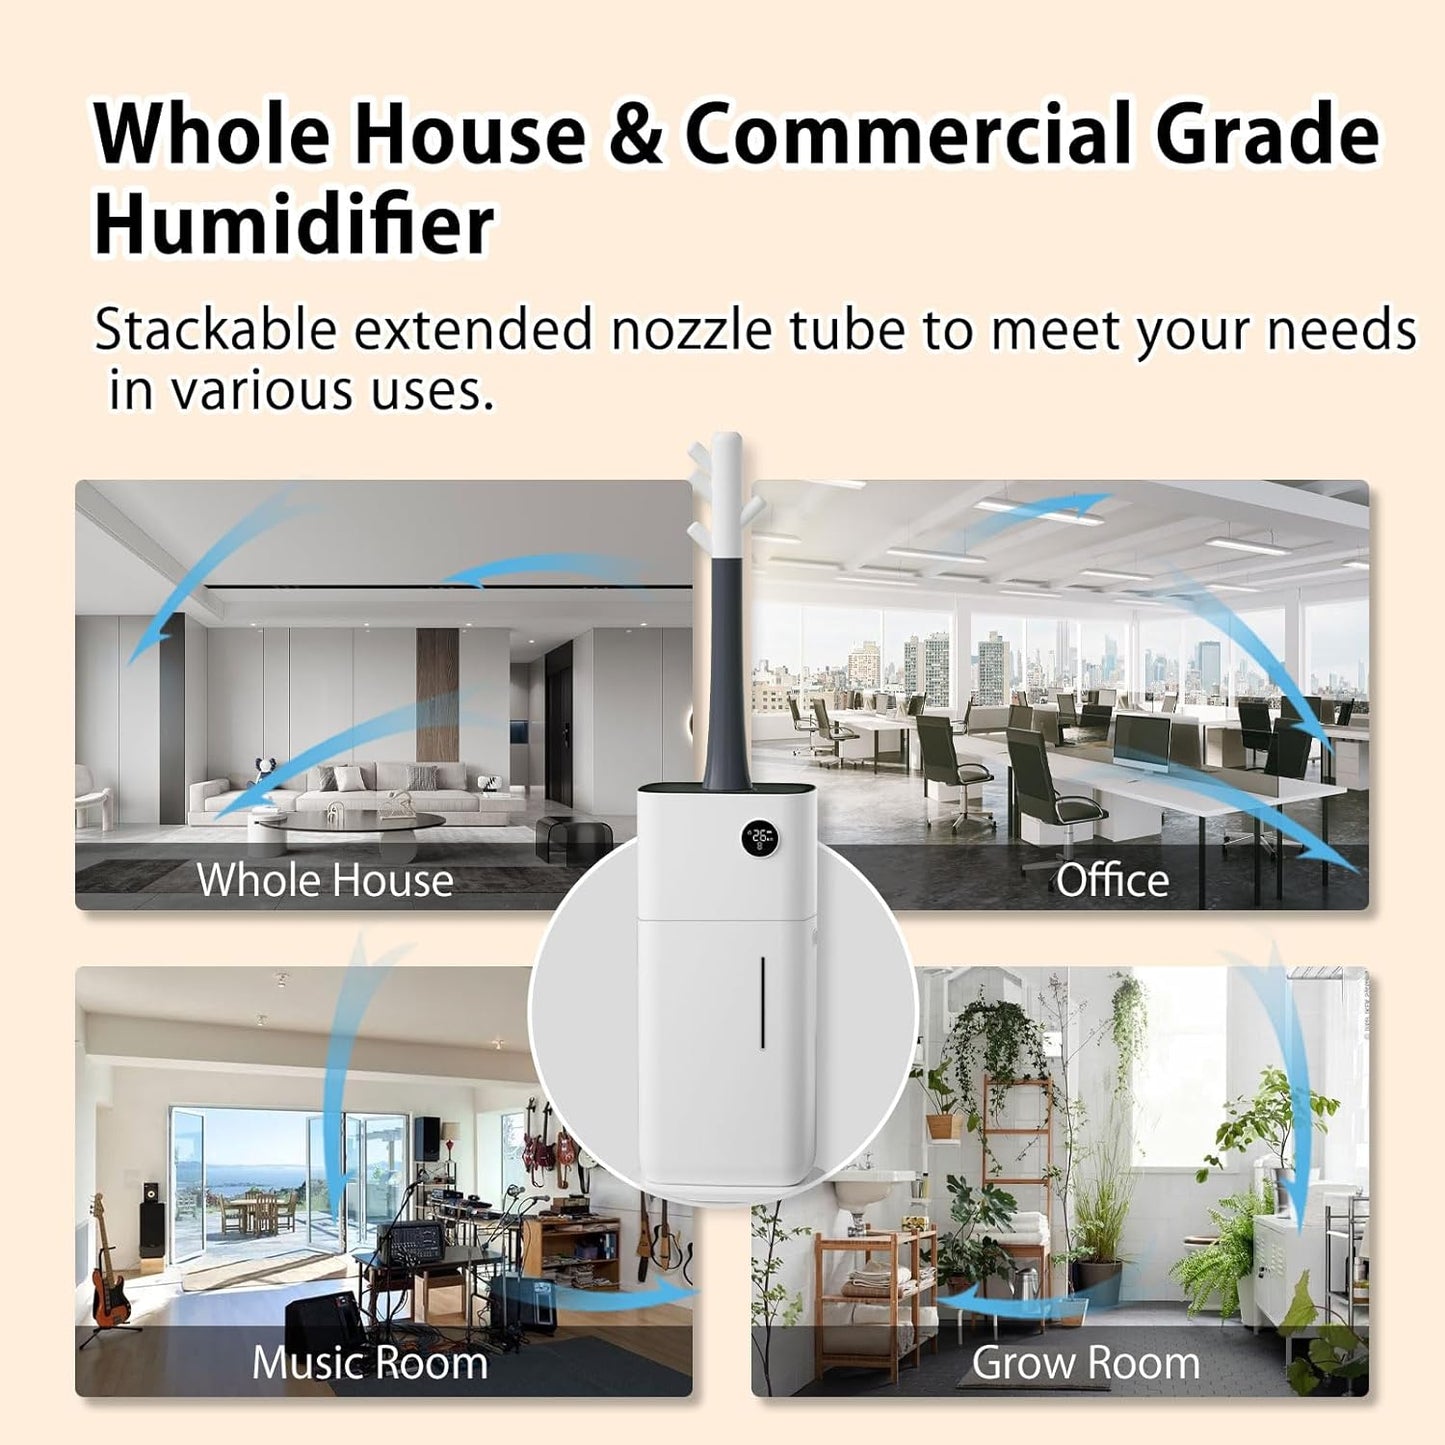 Large Humidifier, Humidifiers for Bedroom Large Room, YOKEKON 5.3Gal/20L Large Humidifiers for Home 3000 sq ft, Whole House Humidifiers Industrial Commercial Humidifier with 360 Nozzle Sets